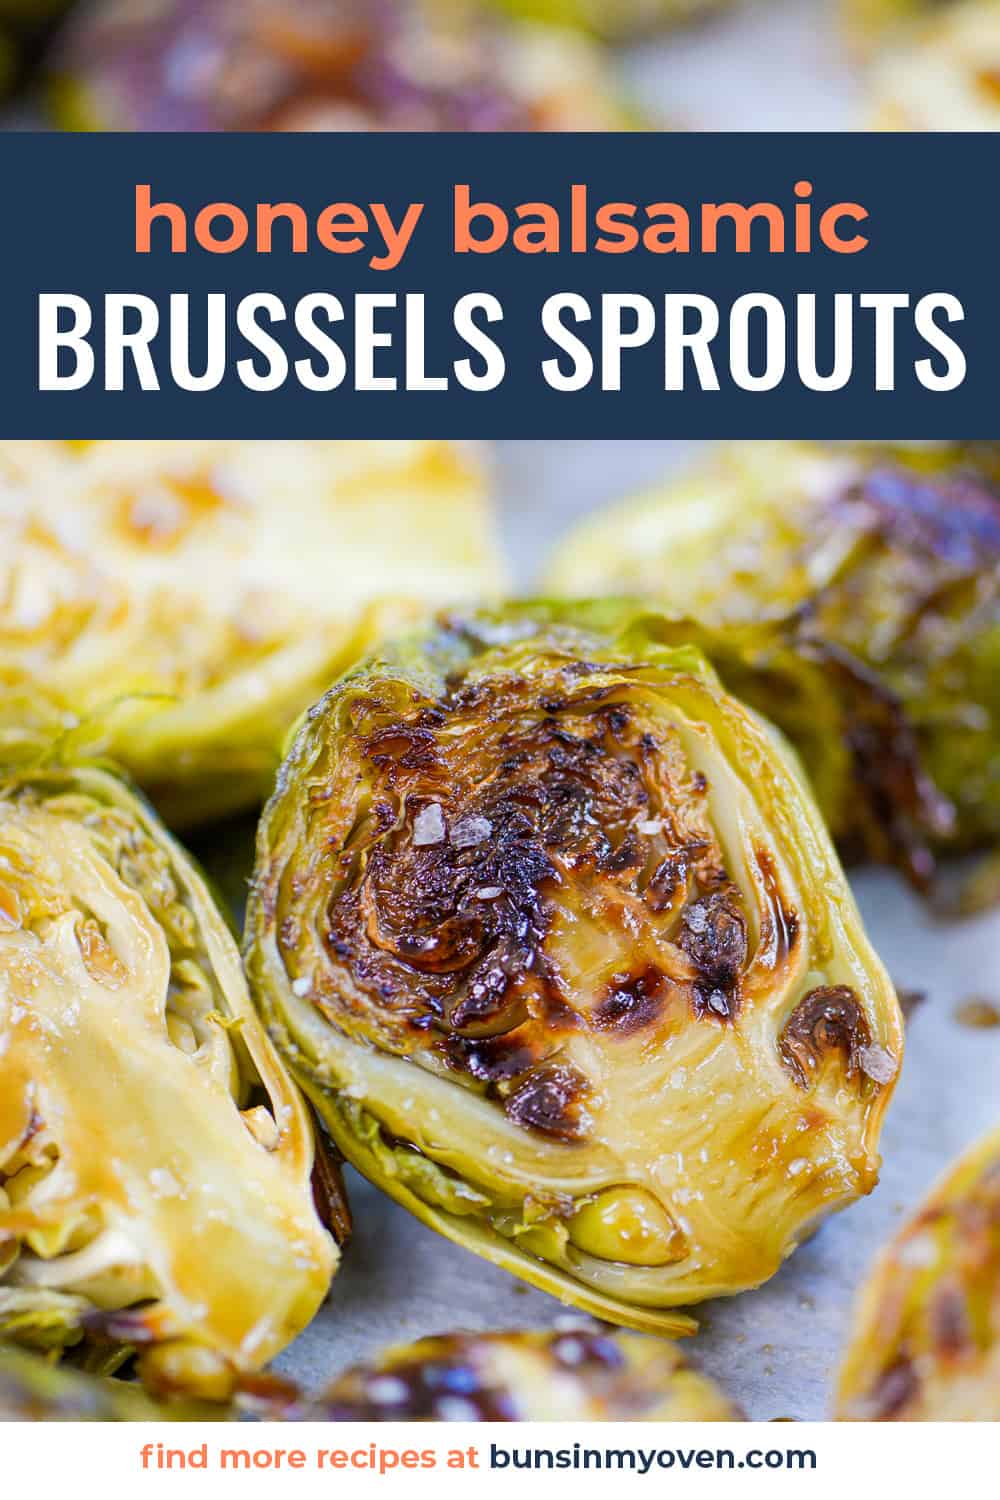 Honey Balsamic Brussel Sprouts on sheet pan.